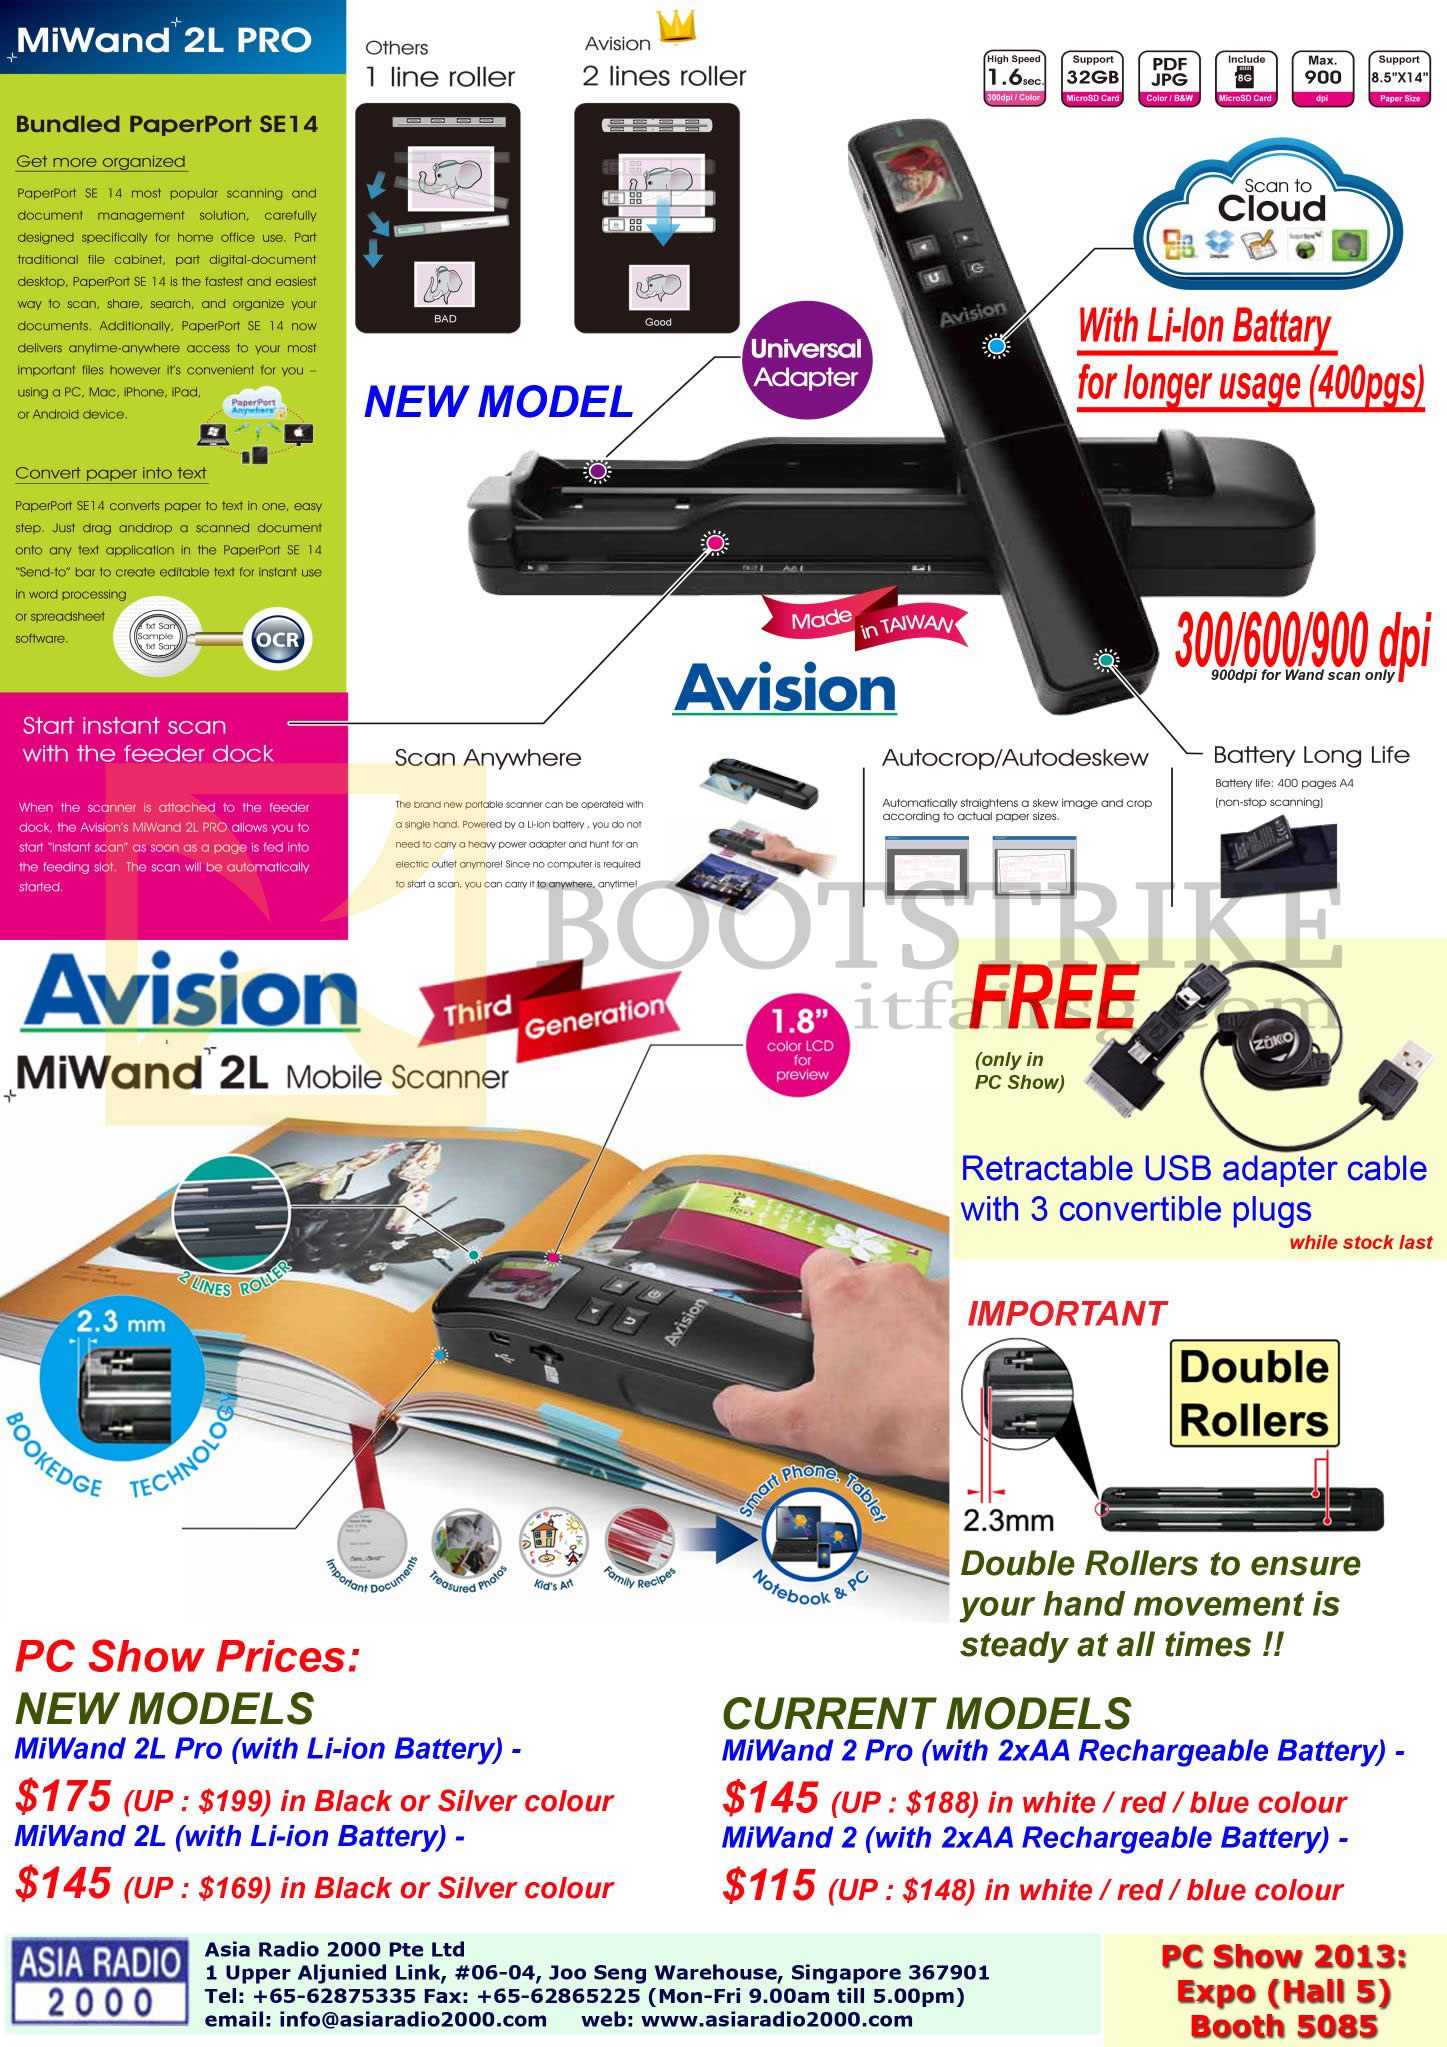 PC SHOW 2013 price list image brochure of Asia Radio Scanners Avision MiWand 2L PRO, MiWand 2L Mobile Scanner